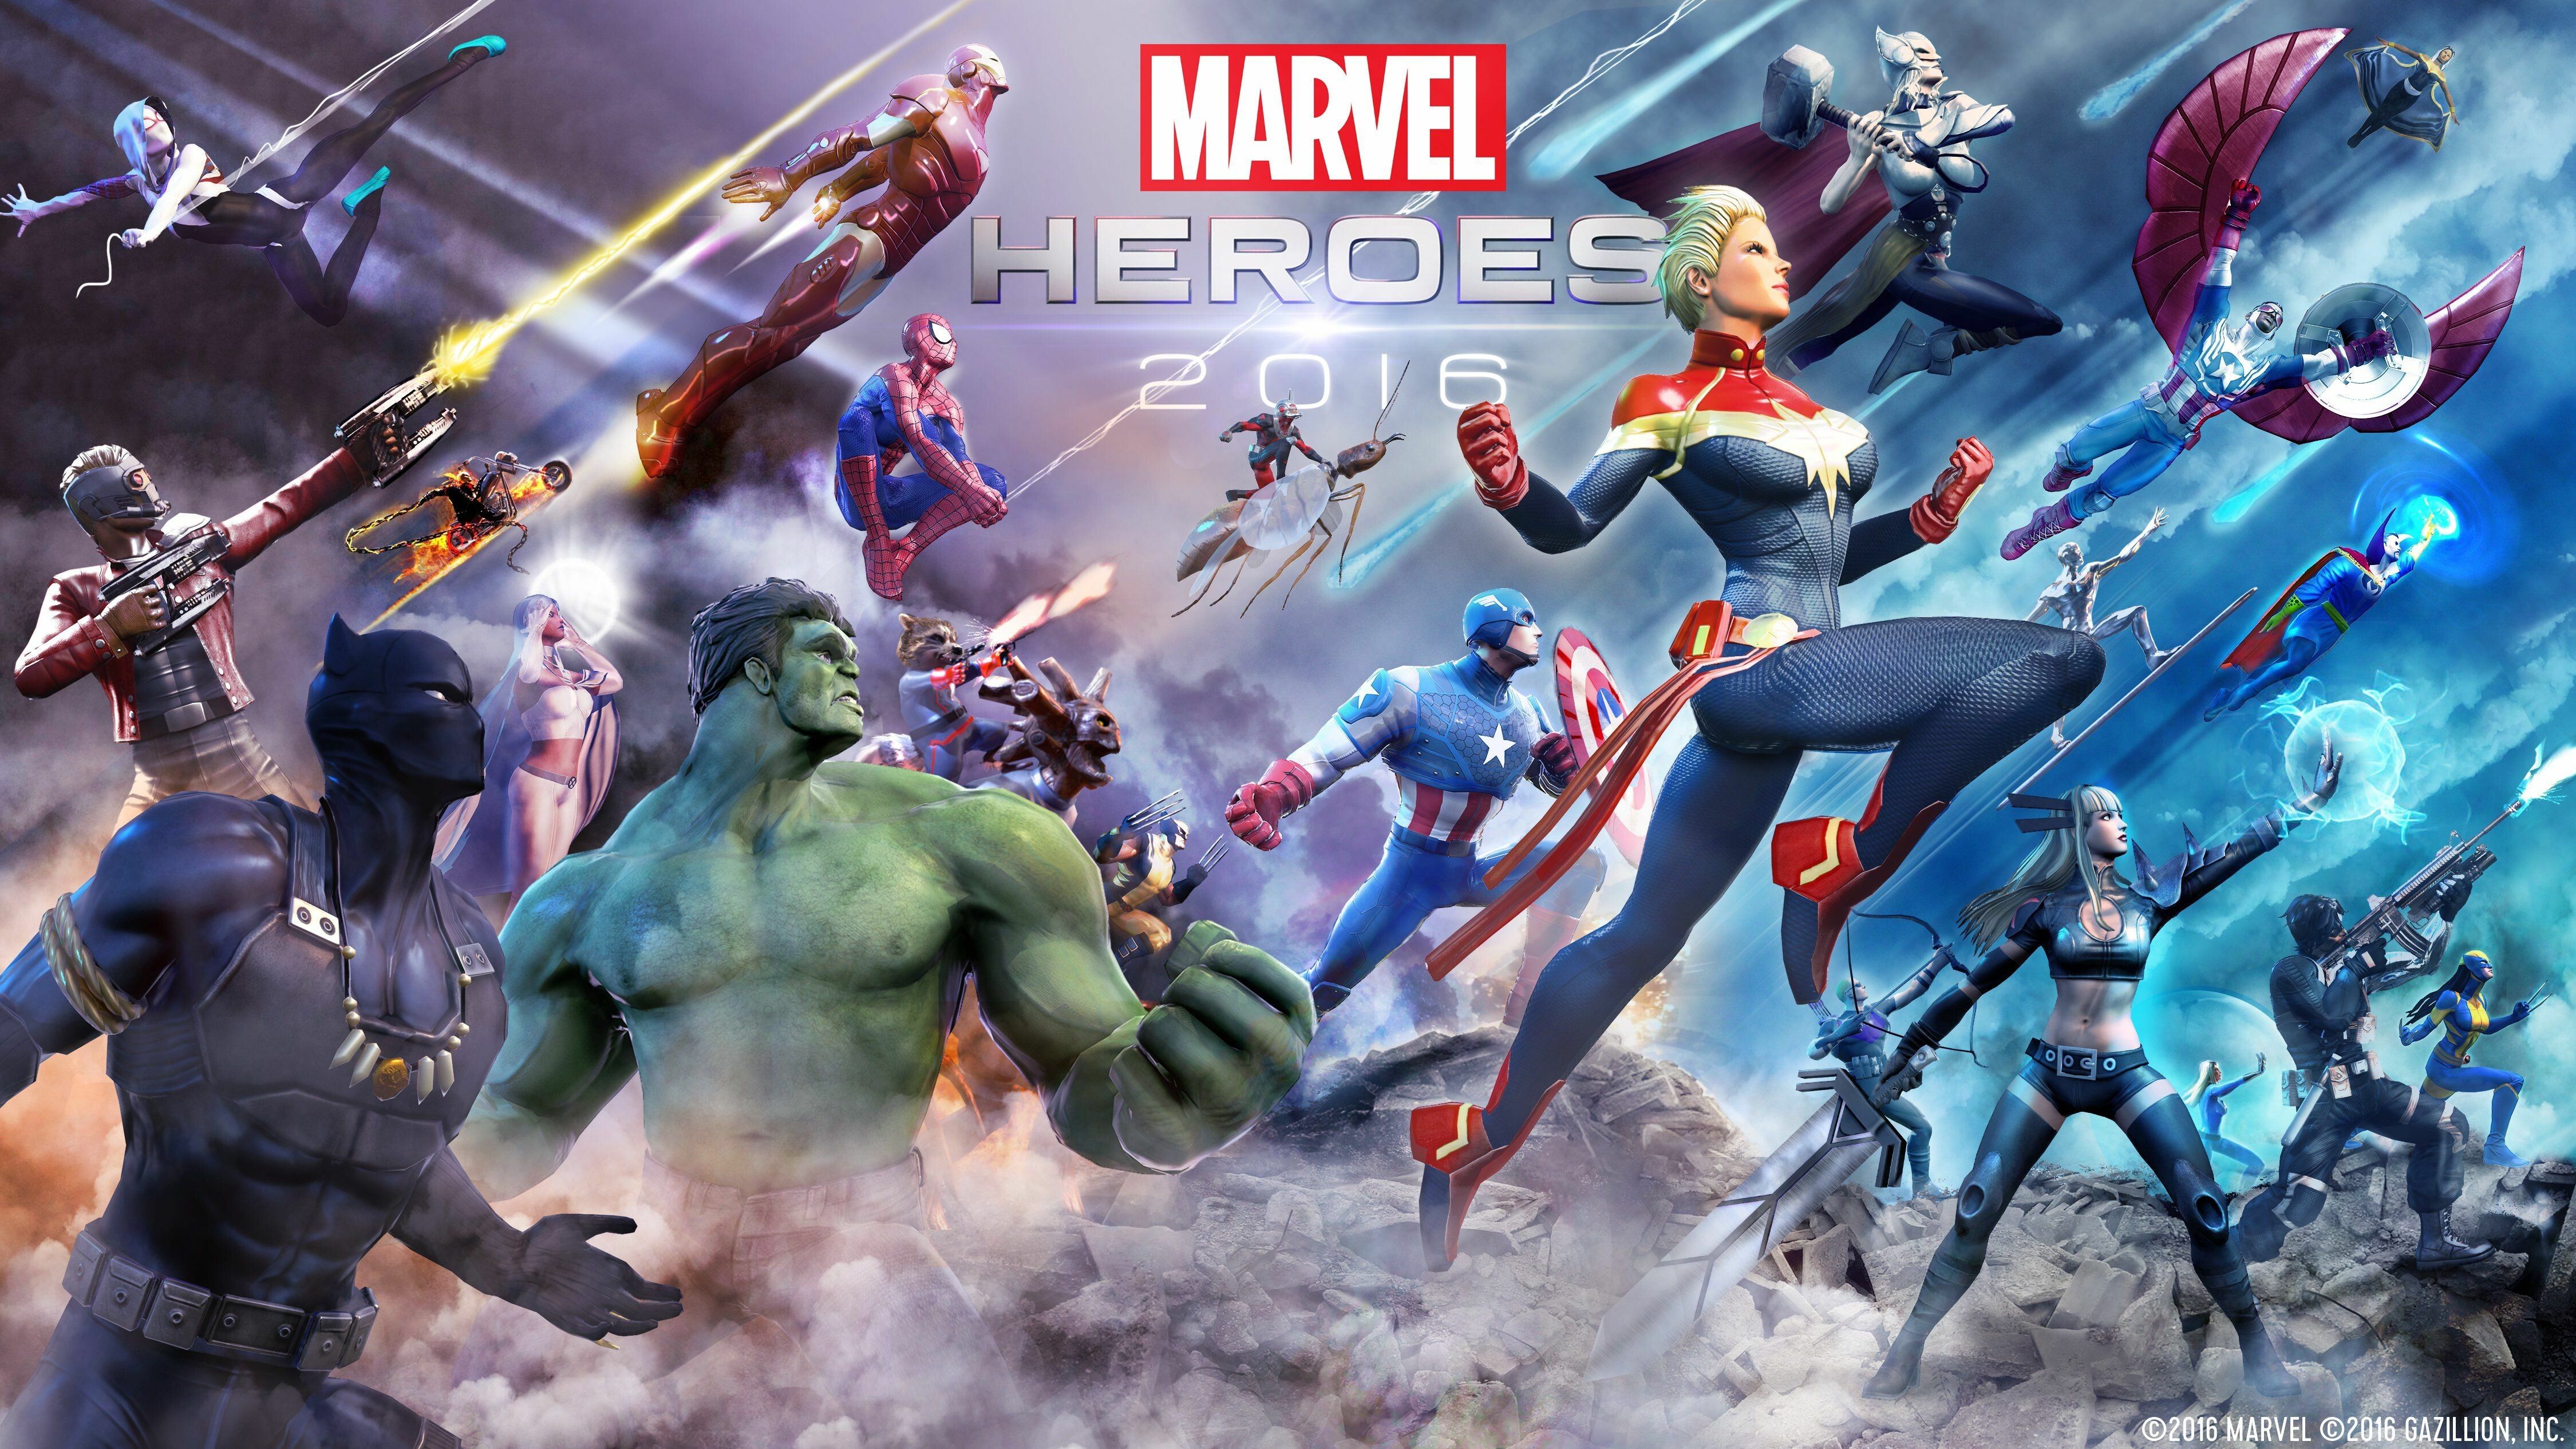 4K Marvel Wallpaper: HD, 4K, 5K for PC and Mobile. Download free image for iPhone, Android